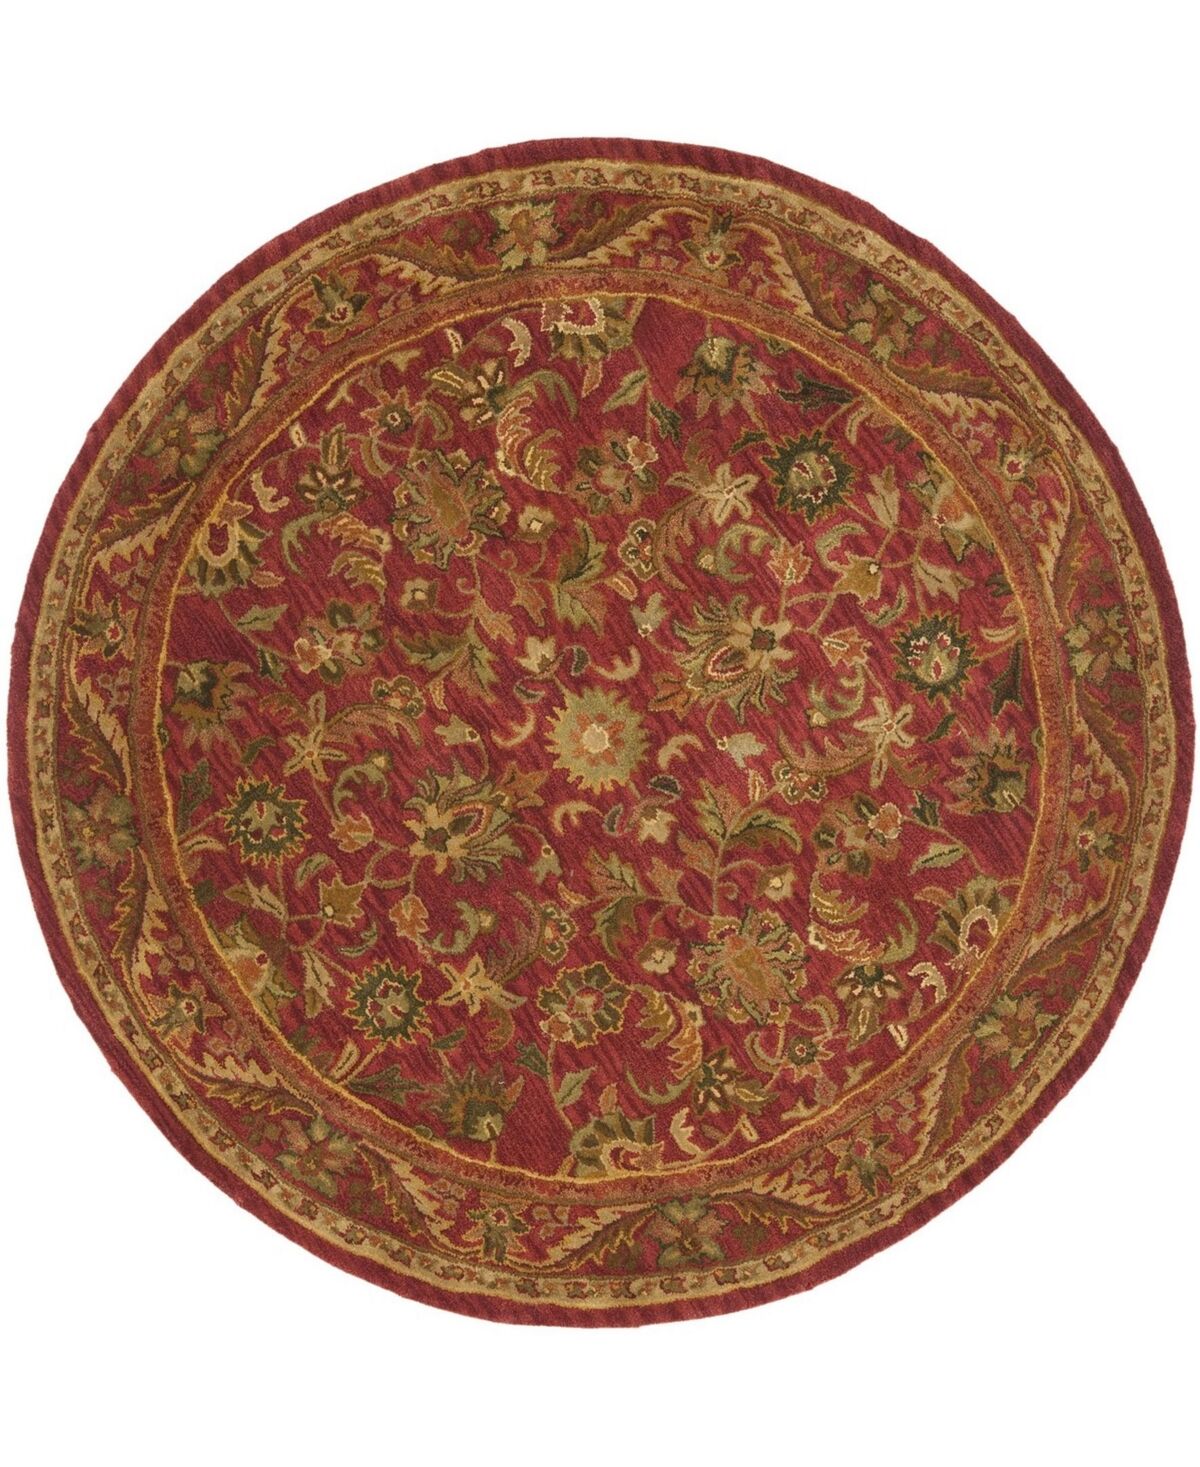 Safavieh Antiquity At52 Red 6' x 6' Round Area Rug - Red